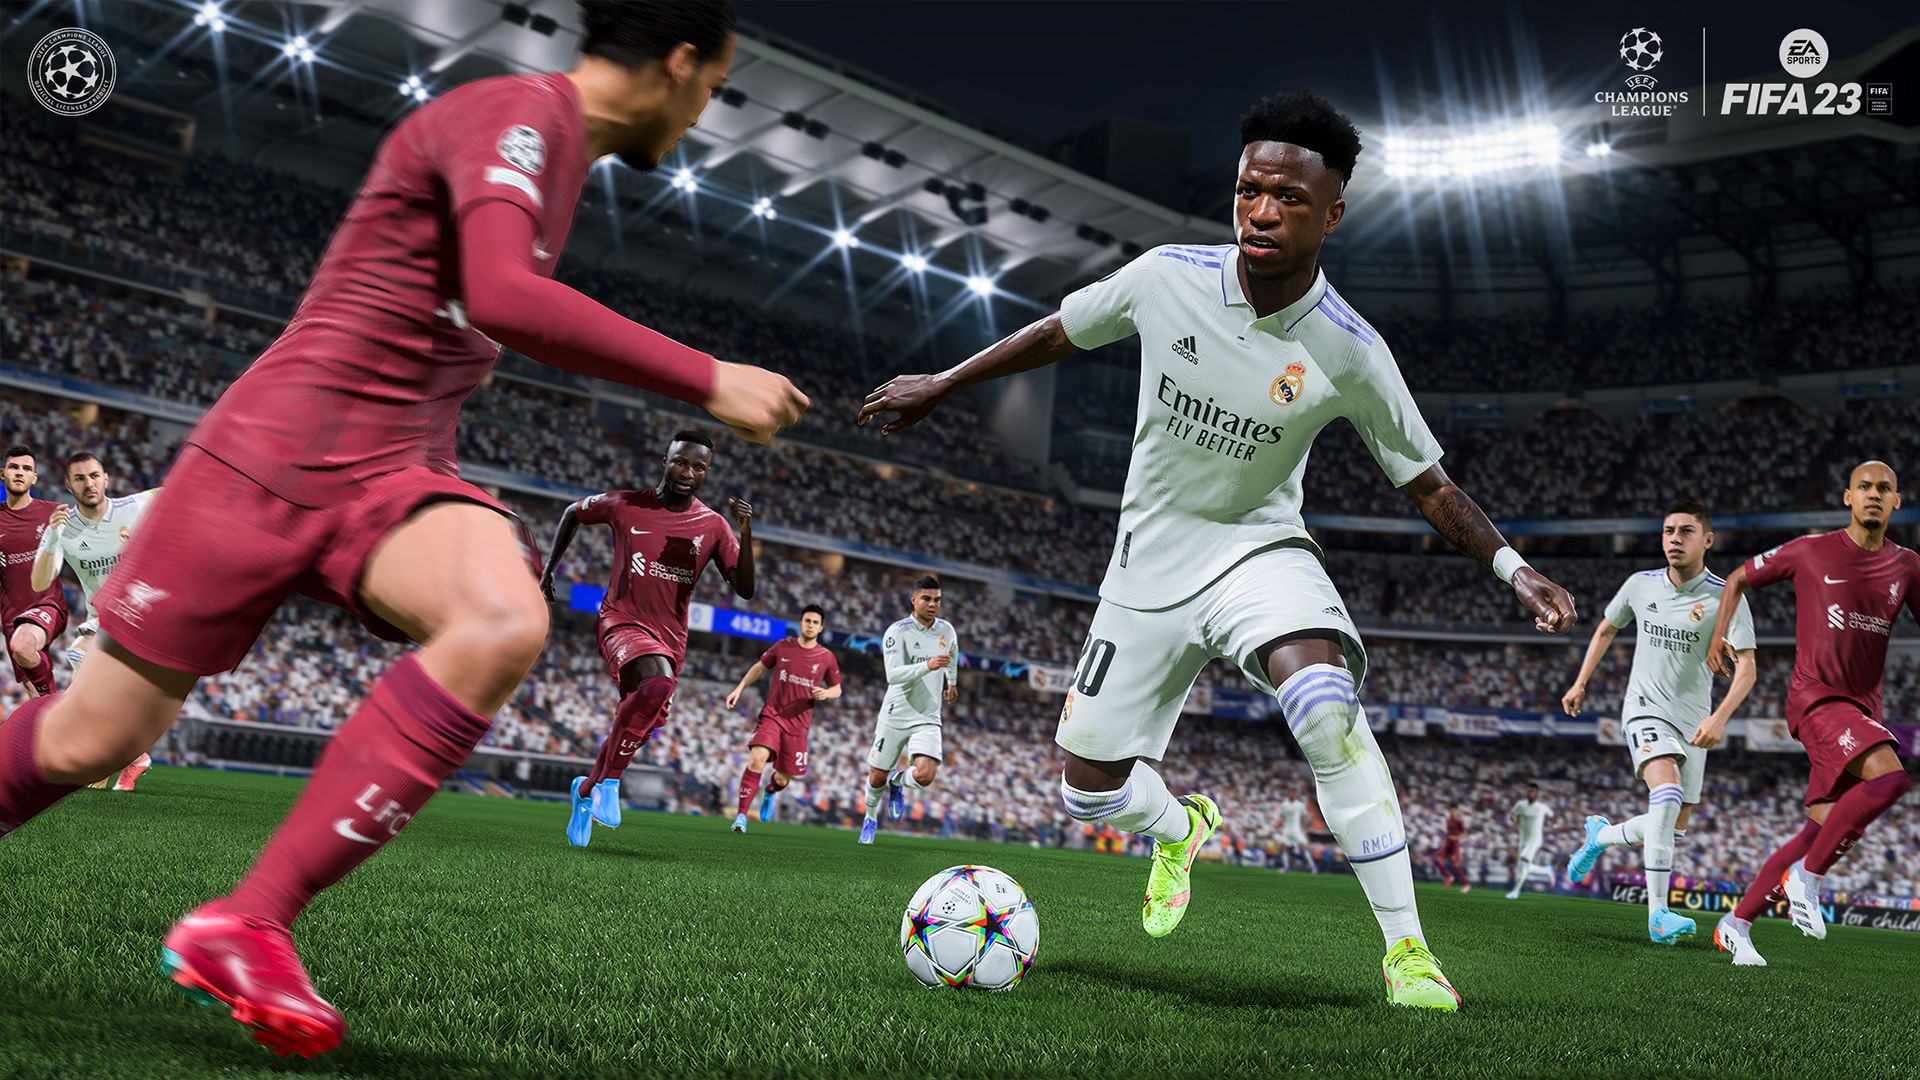 The Best Dribblers in FIFA 23